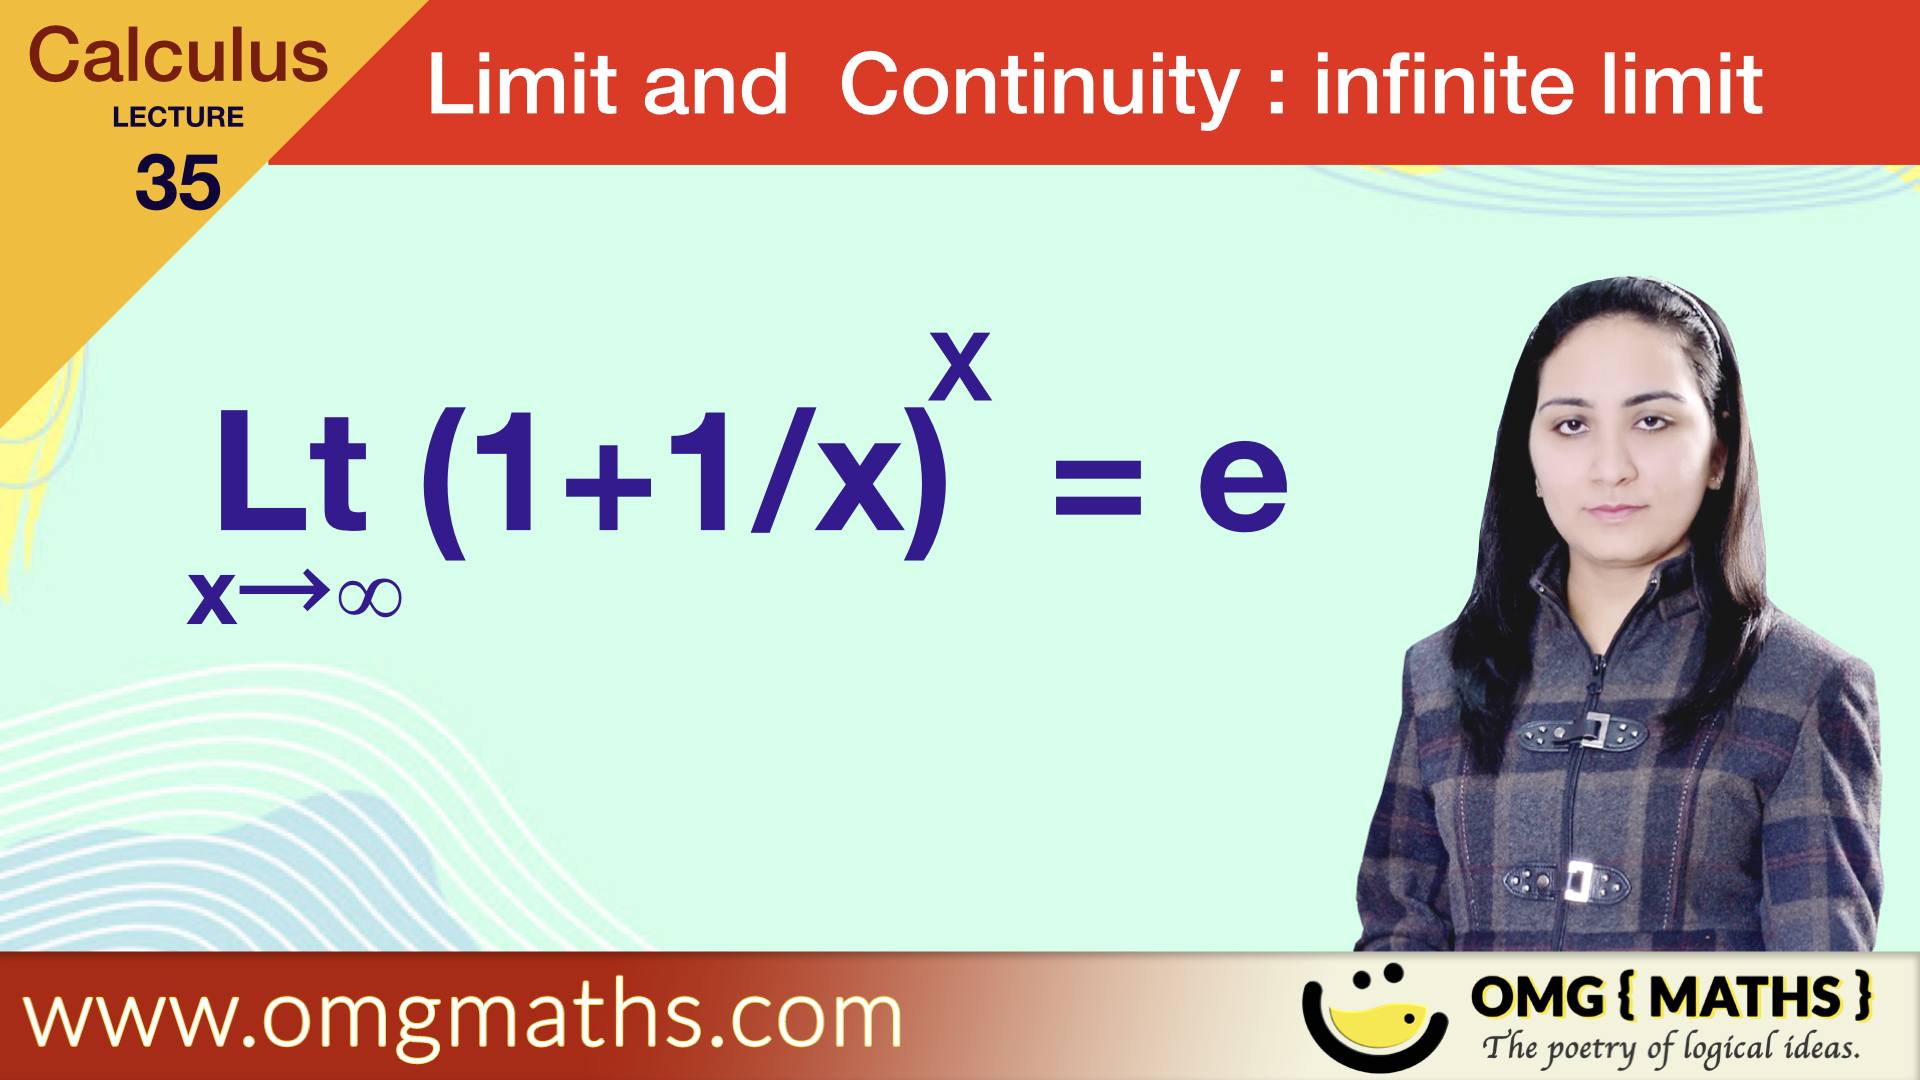 limit x tends to ∞ (1+1/x)^x = e | proof | infinite limit | bsc | limit and continuity